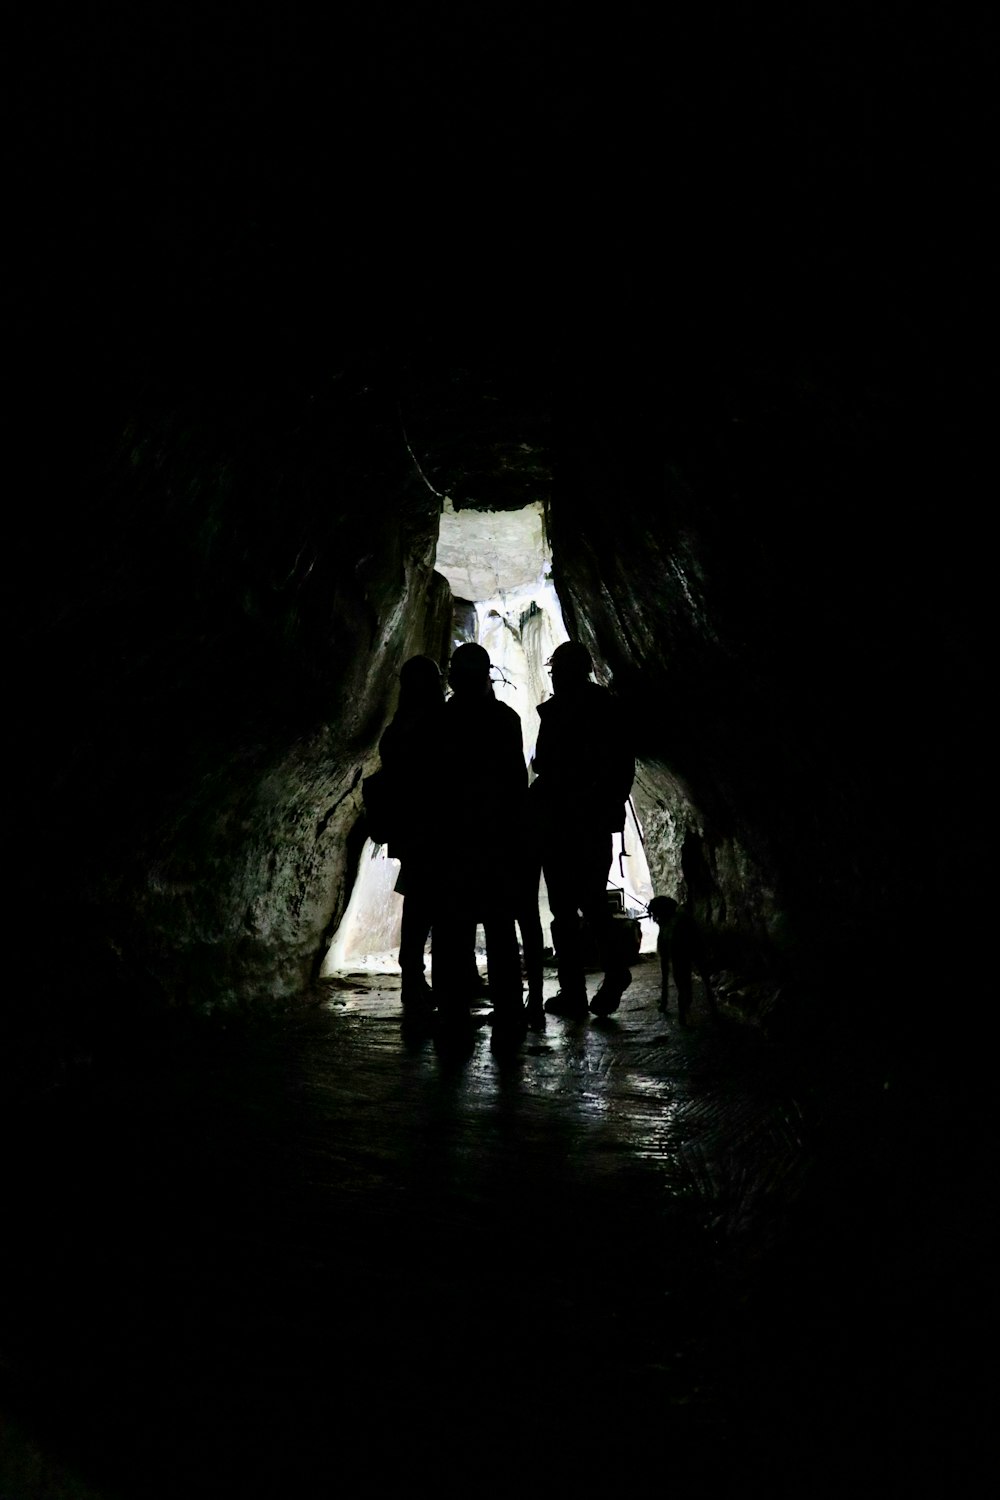 2 men in cave during daytime